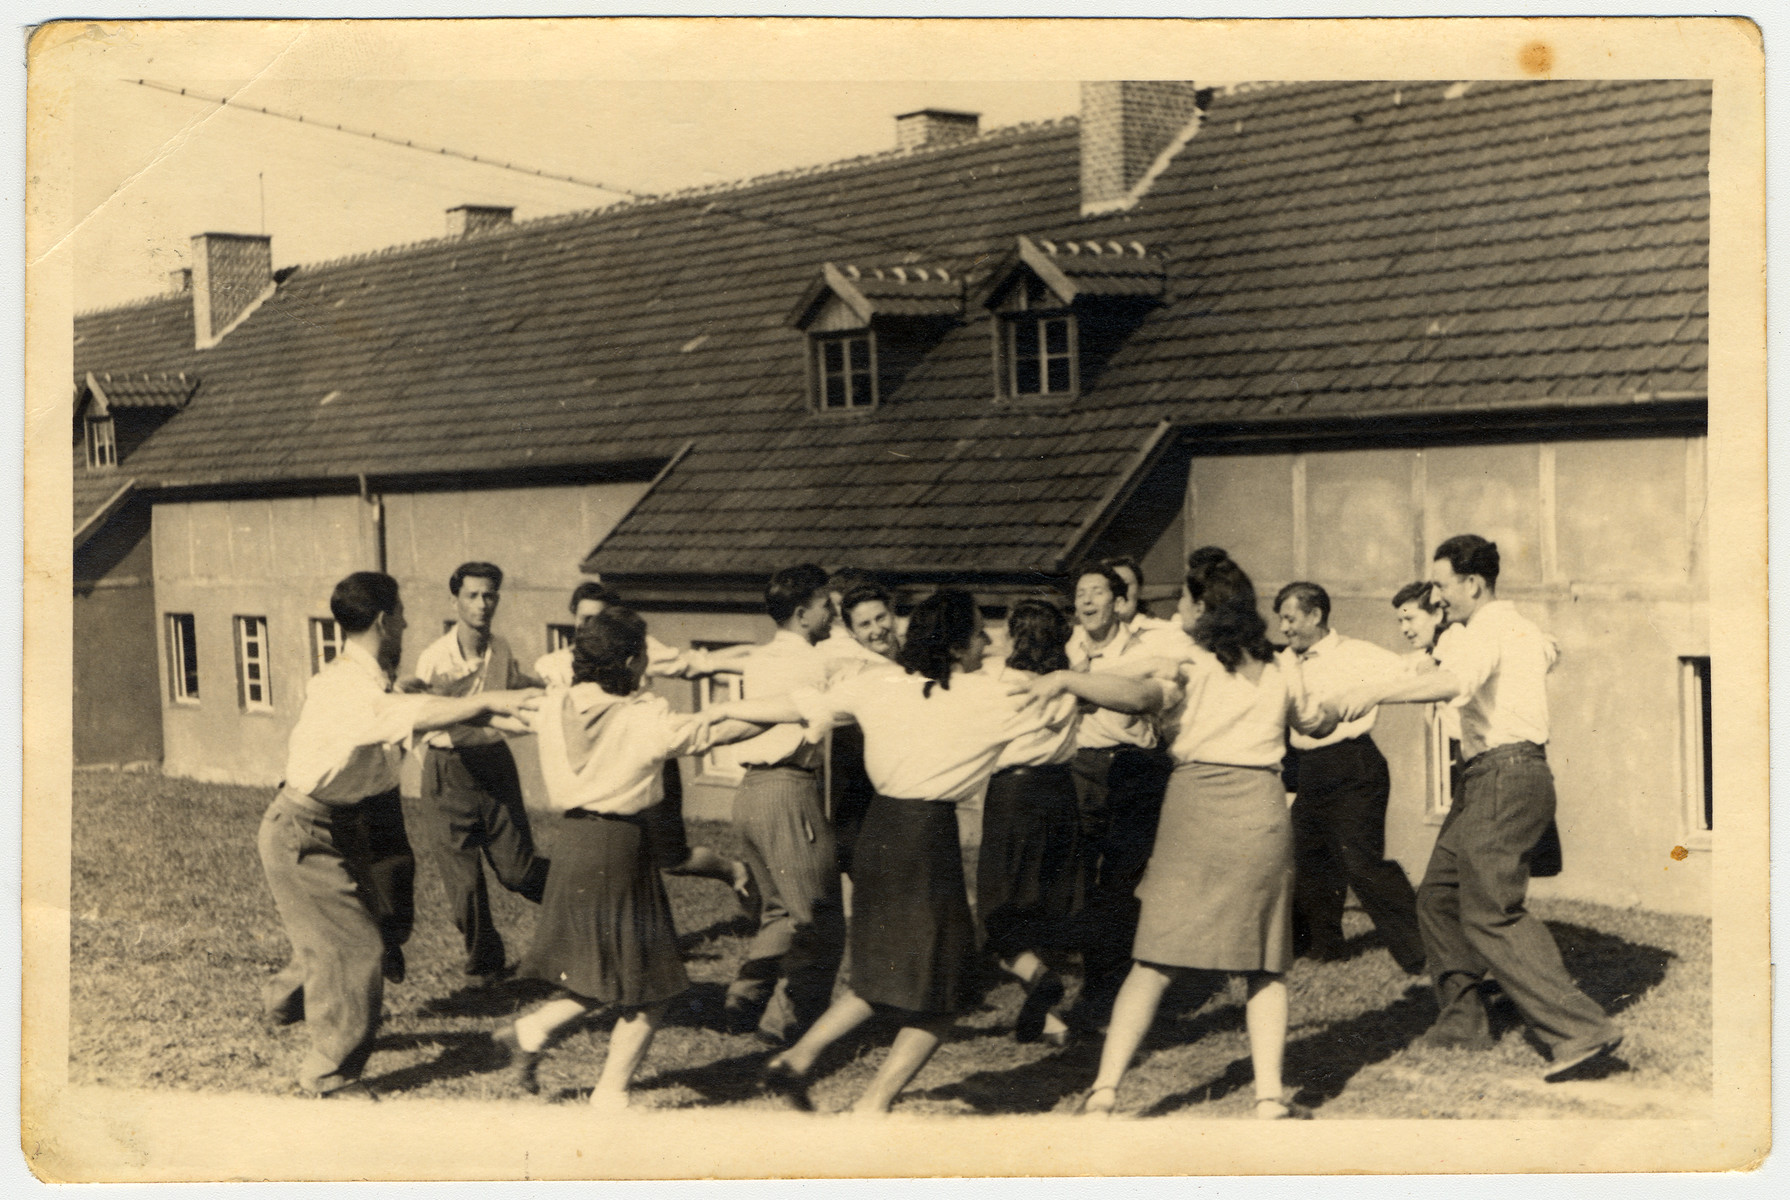 Young people dance a hora in the Kibbutz LaNegev Hachshara in the Hessisch-Lichtenau displaced persons' camp.

Among those pictured is the leader Gotek Goldring.